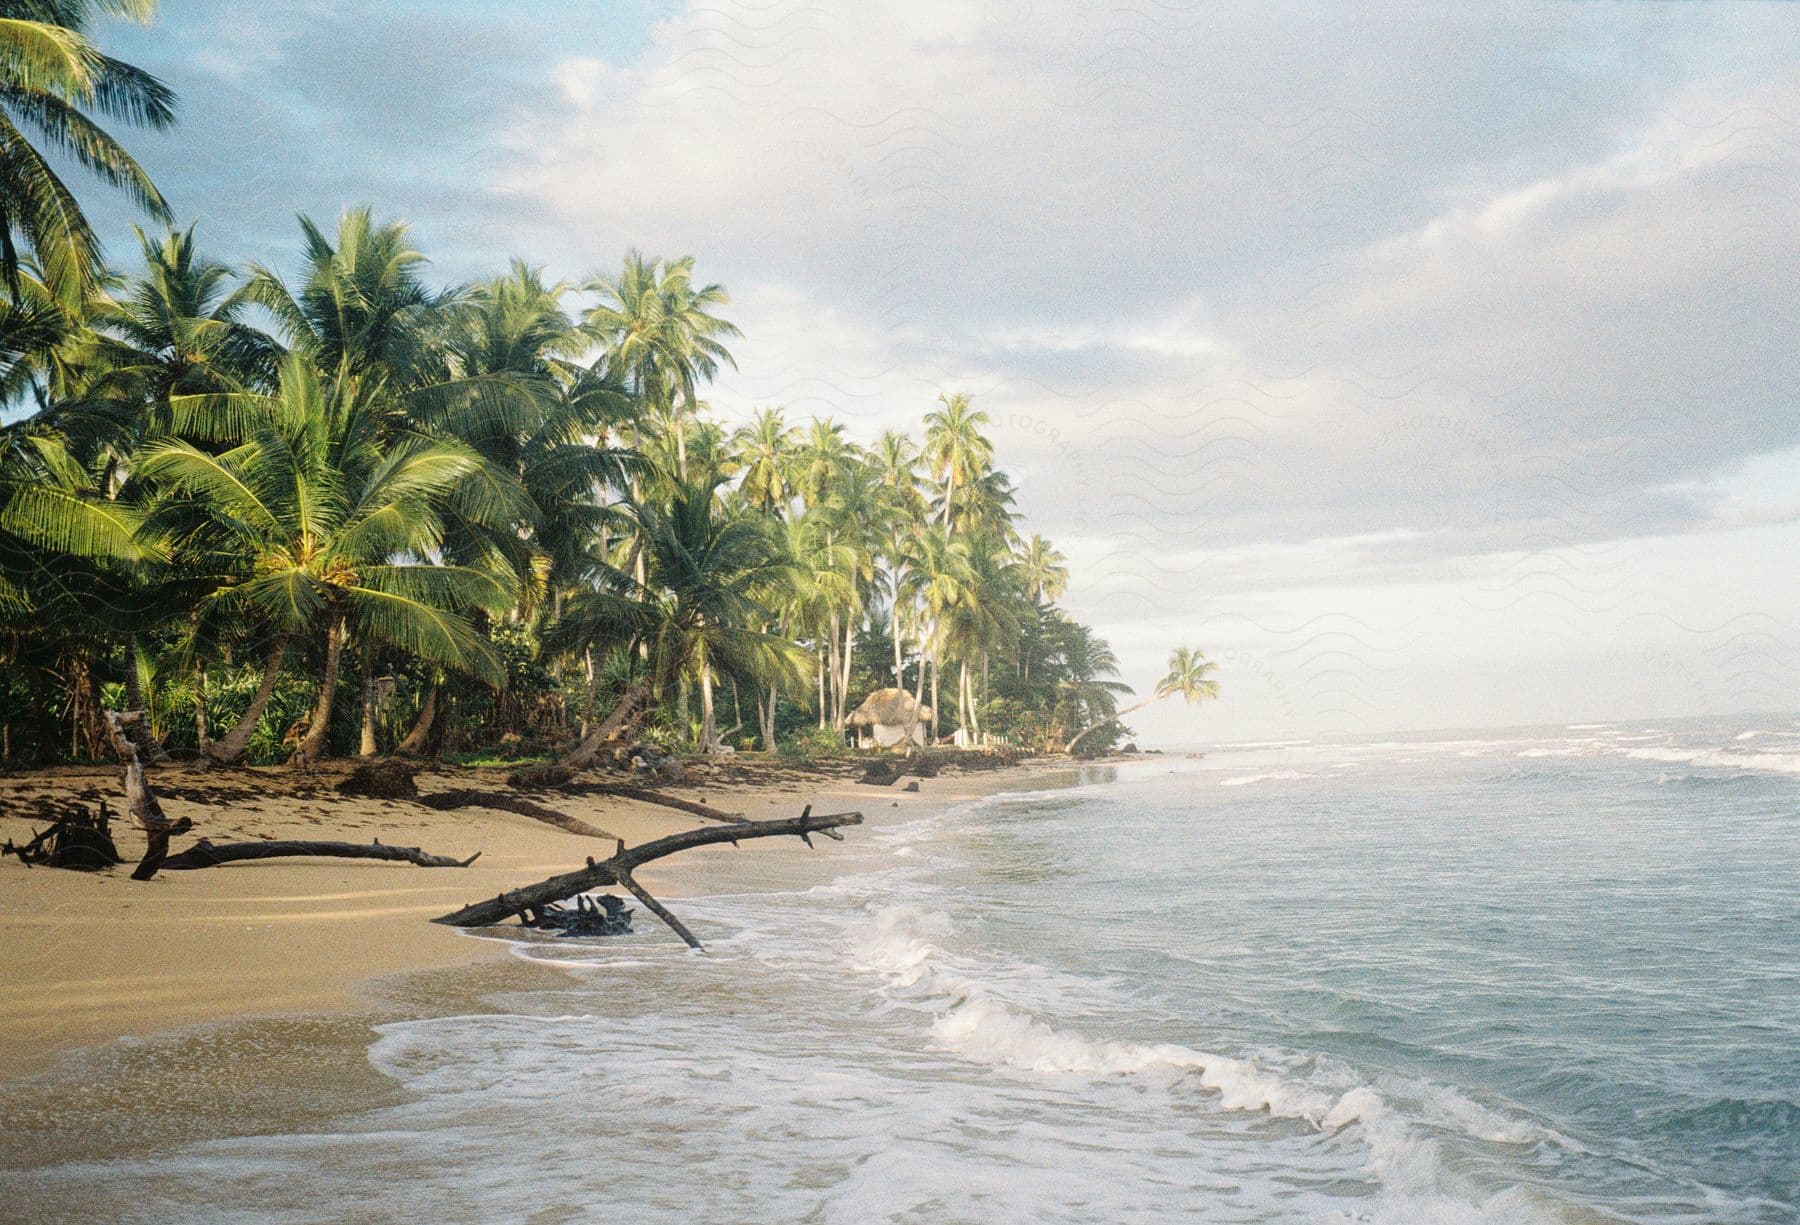 Landscape of a tropical beach with palm trees near the ocean